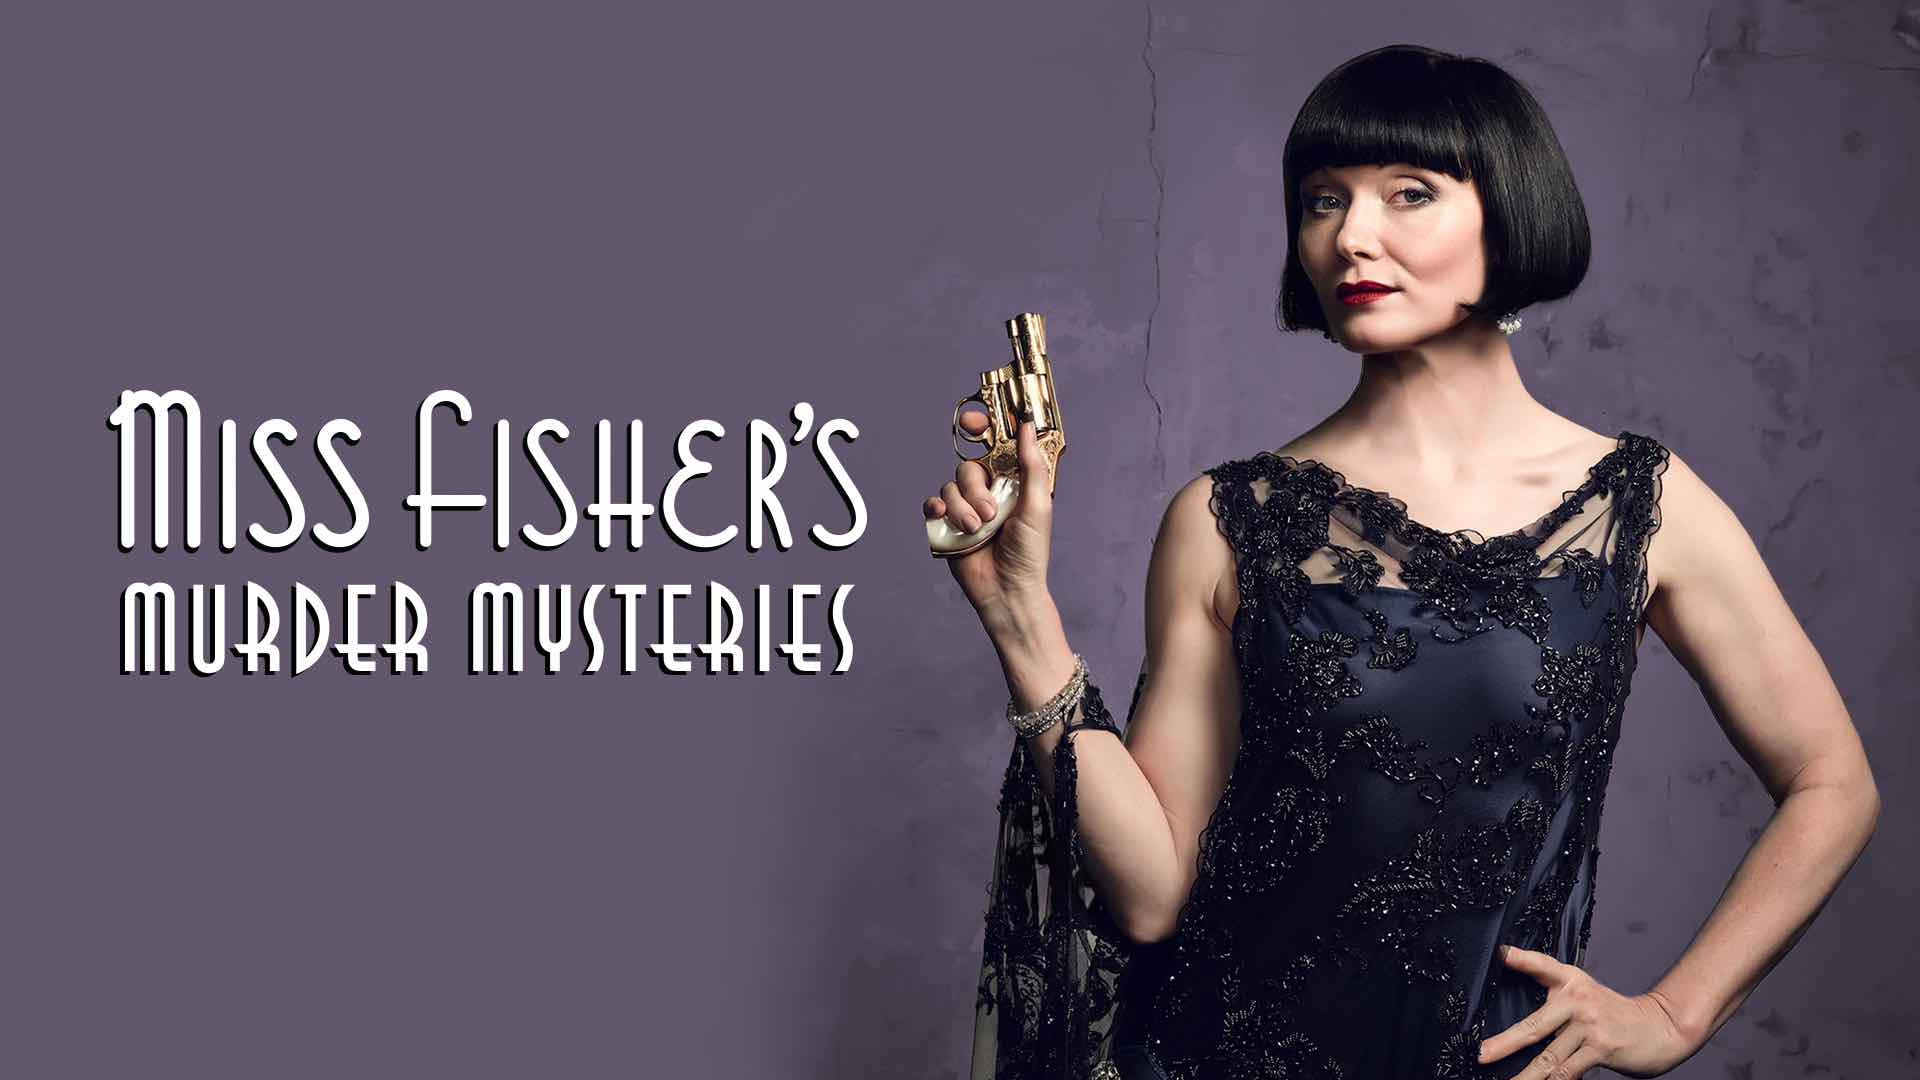 Need a cozy crime drama? 'Miss Fisher's Murder Mysteries' is perfect